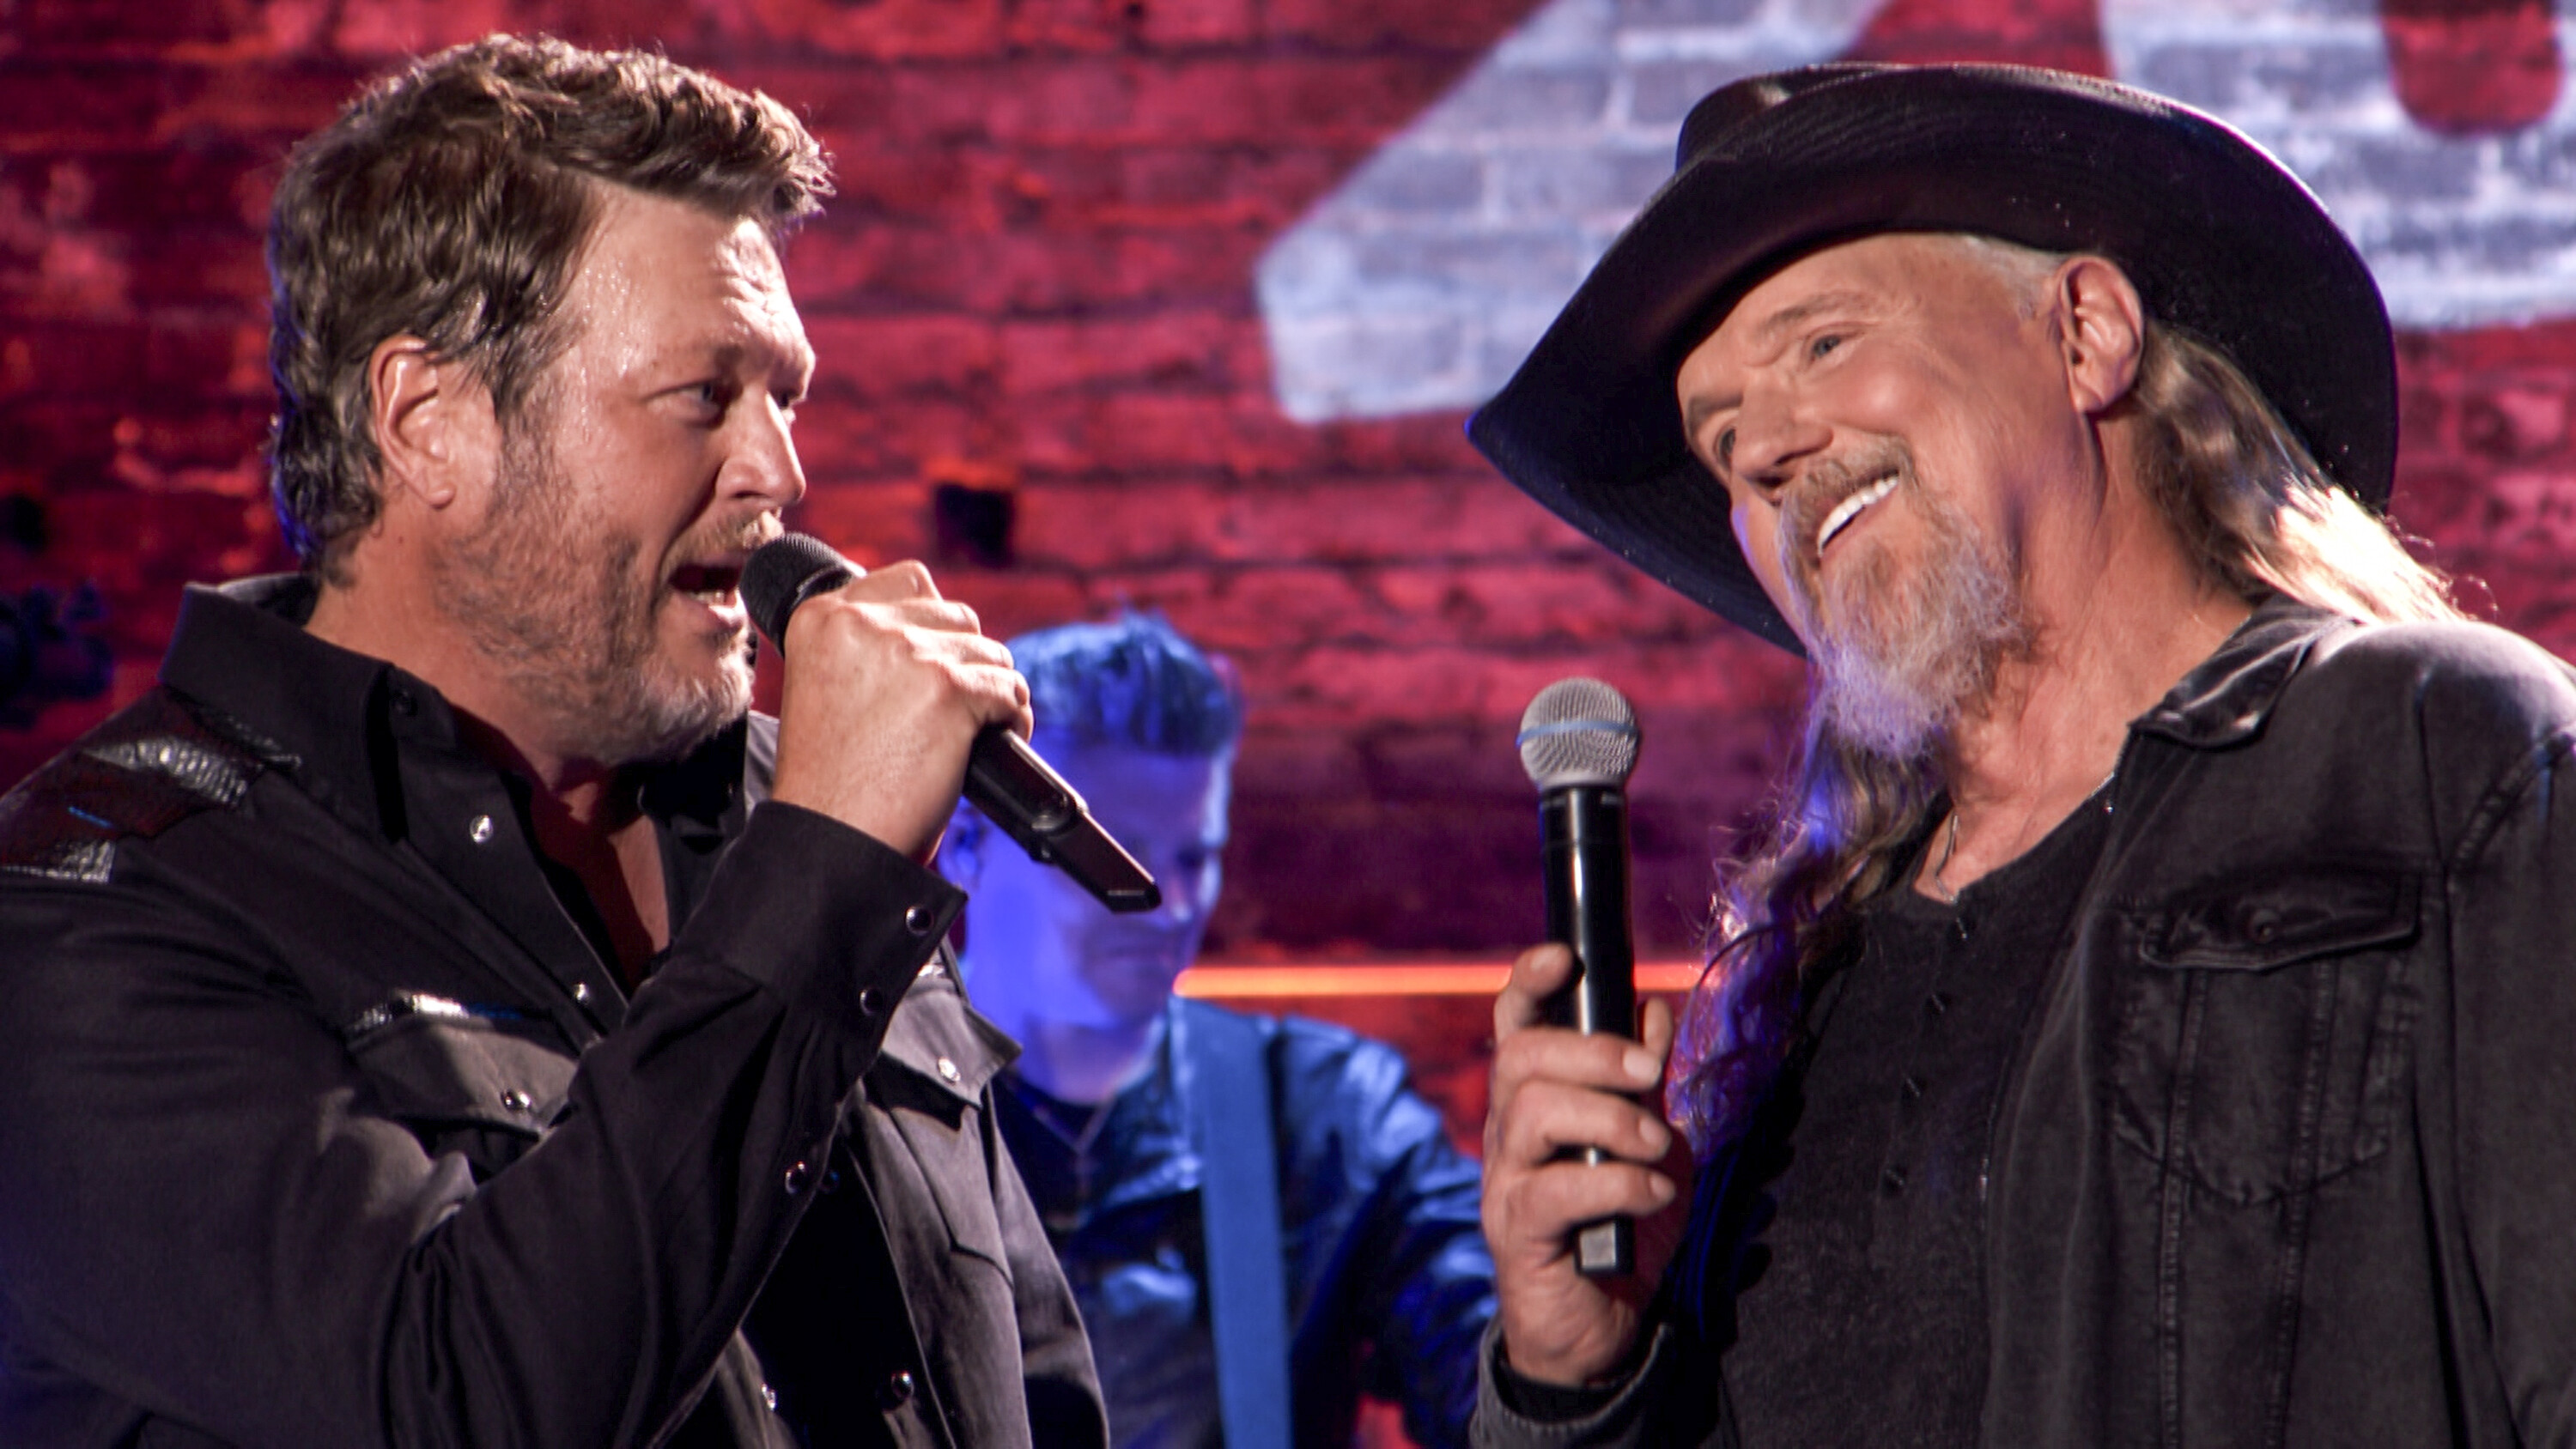 Blake Sheltong and Trace Adkins perform at the NEW YEAR’S EVE LIVE: NASHVILLE’S BIG BASH, a star-studded entertainment special. The celebration to ring in the new year will air LIVE Sunday, Dec. 31 (7:30-10:00 PM, ET/PT, 10:30 PM-1:05 AM, ET/PT) on the CBS Television Network, and streaming on Paramount+ Photo: CBS ©2023 CBS Broadcasting, Inc. All Rights Reserved. Highest quality screengrab available.